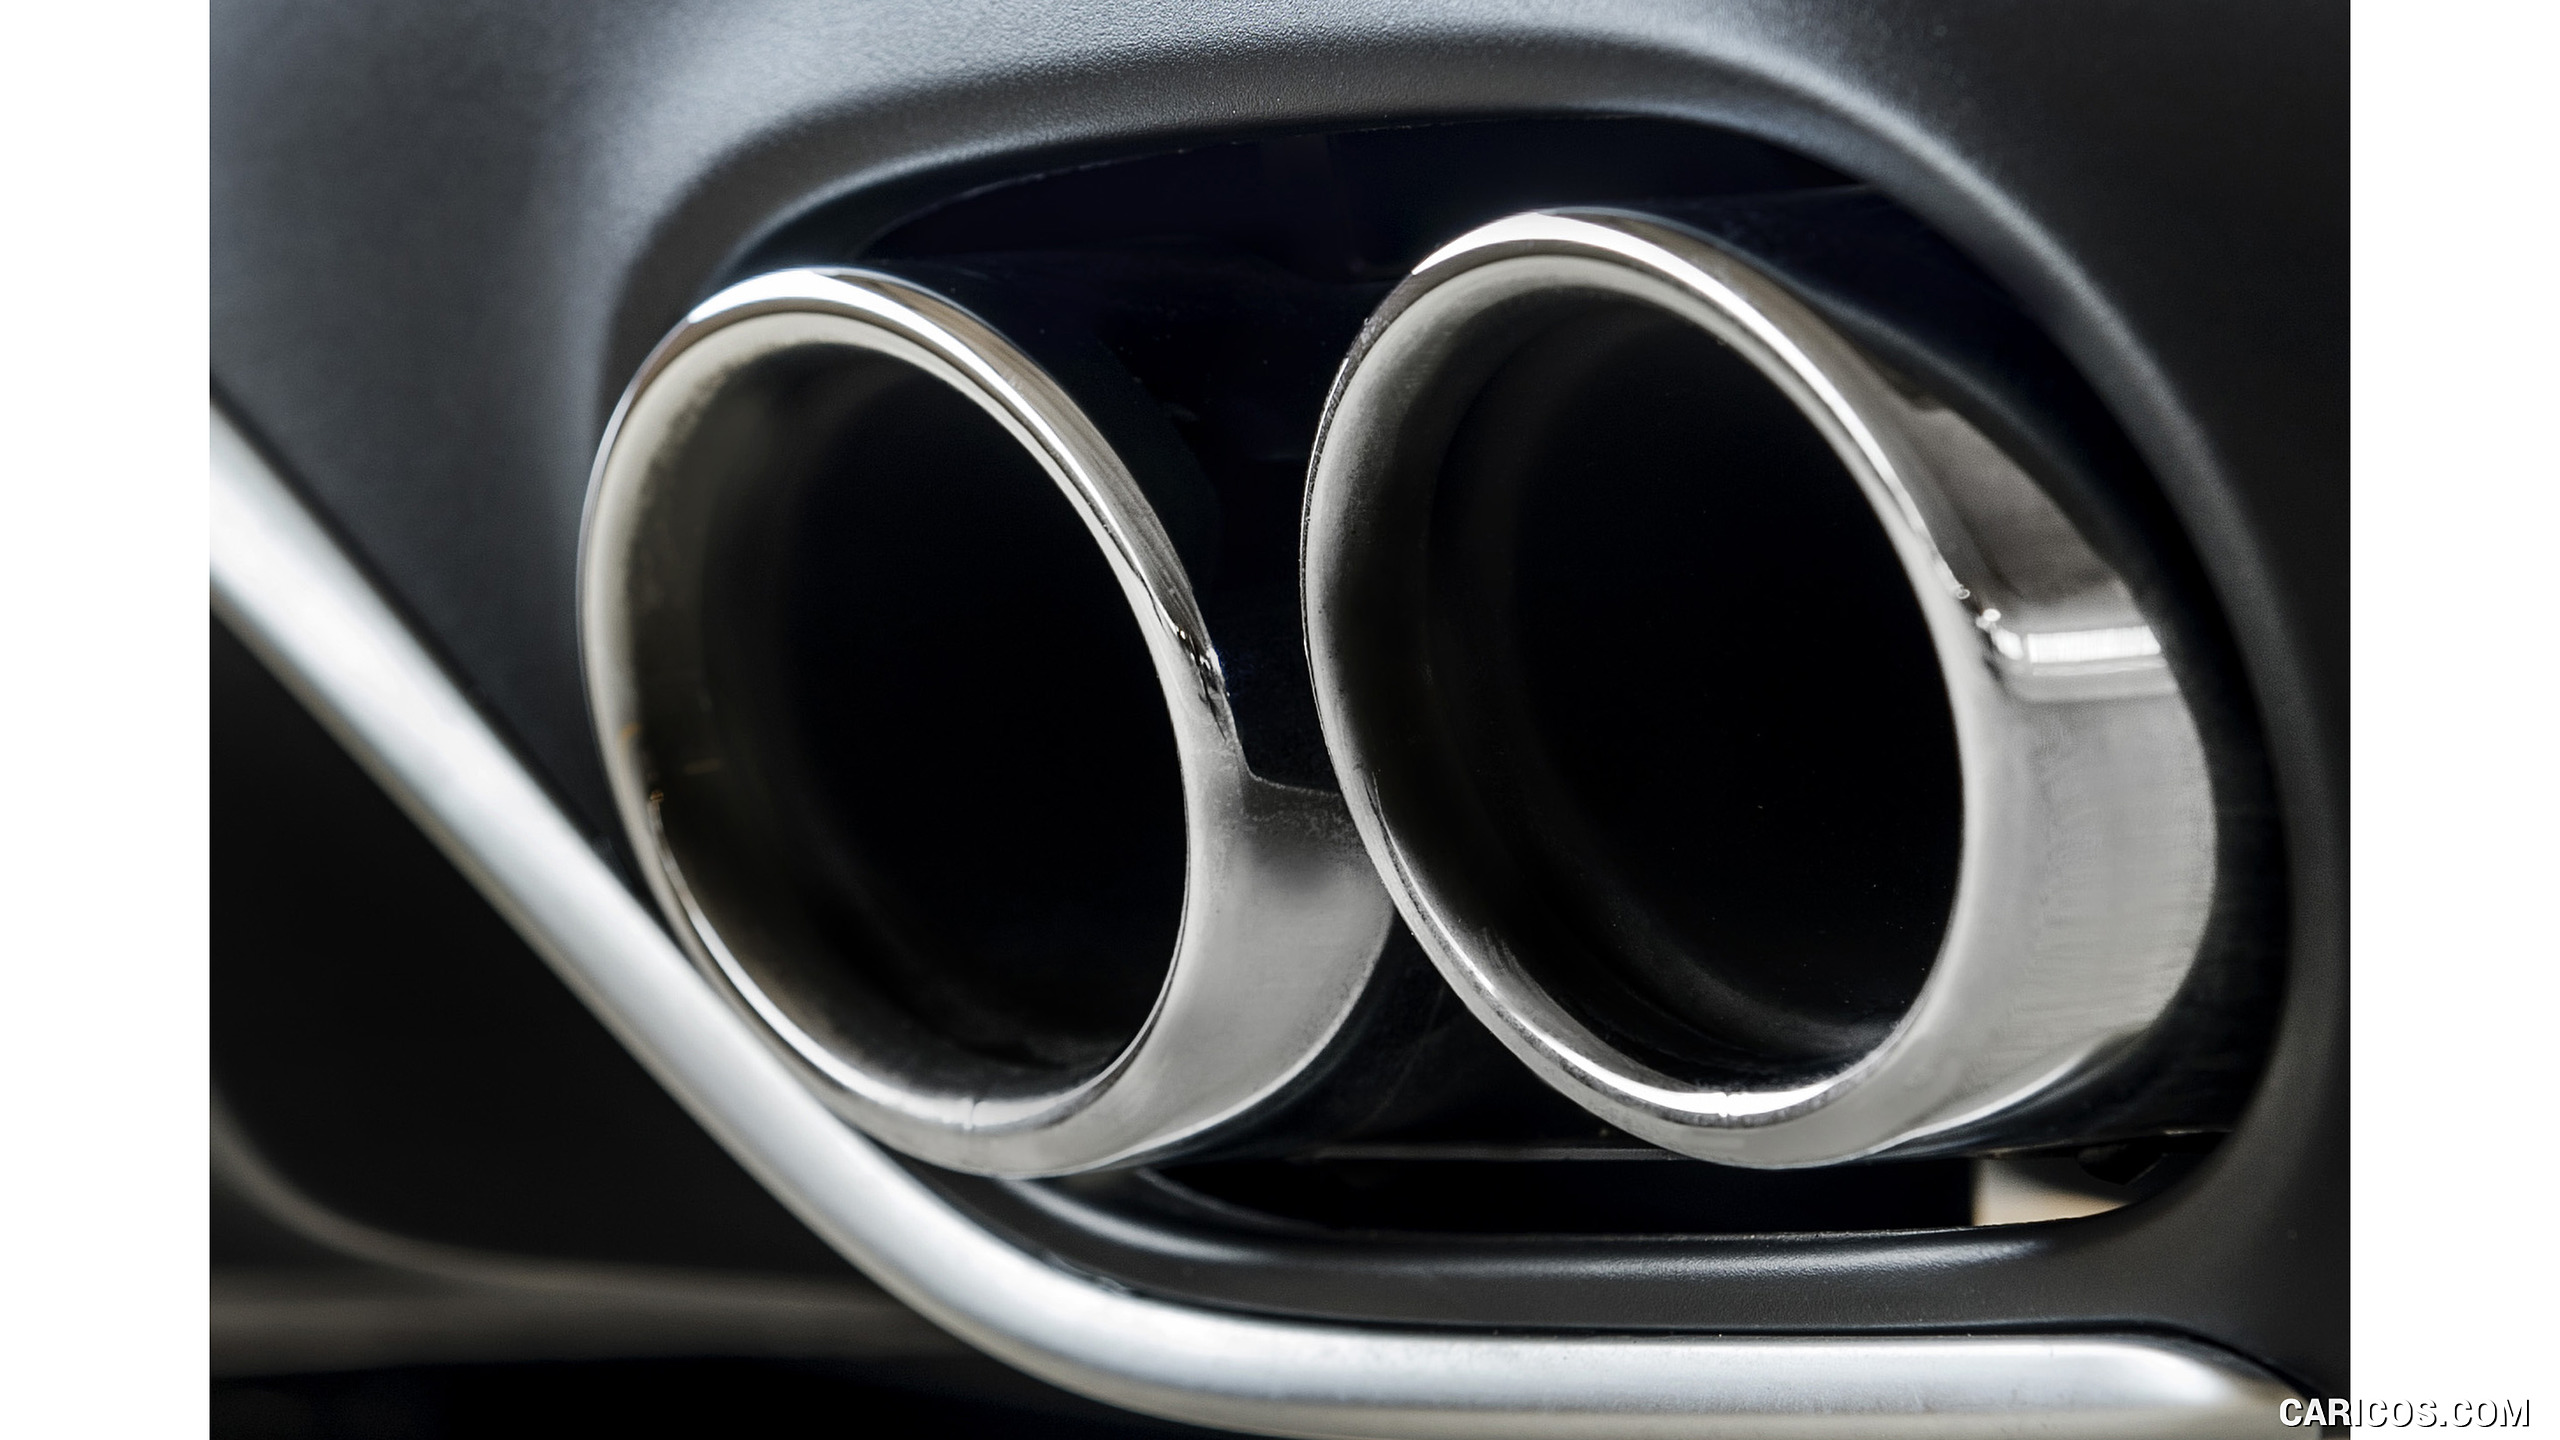 2019 Mercedes-AMG E 53 4MATIC+ Coupe (US-Spec) Wallpaper - Exhaust, #160 of 193